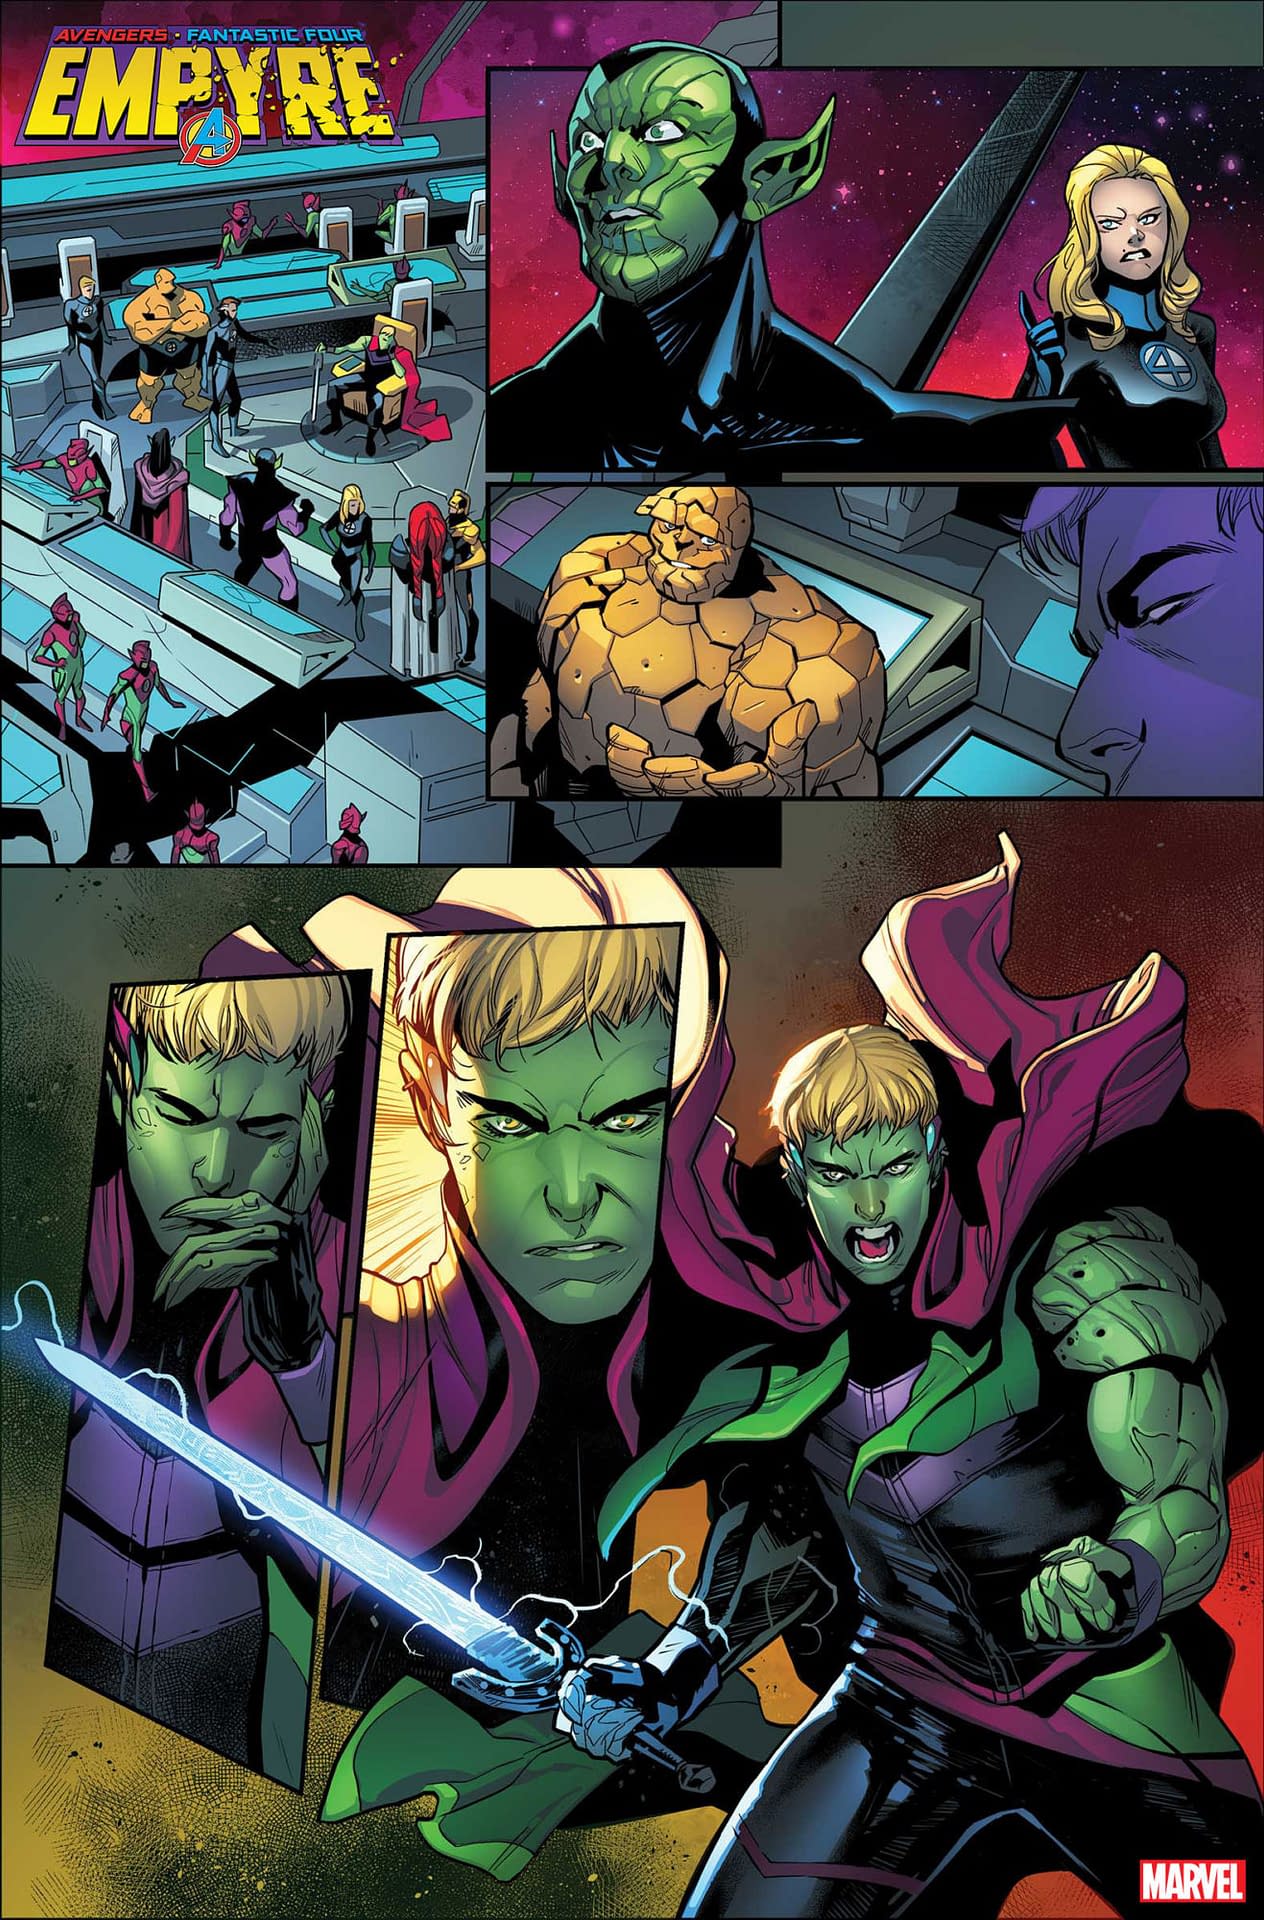 5 Interior Pages from A4: Empire with a Y #1